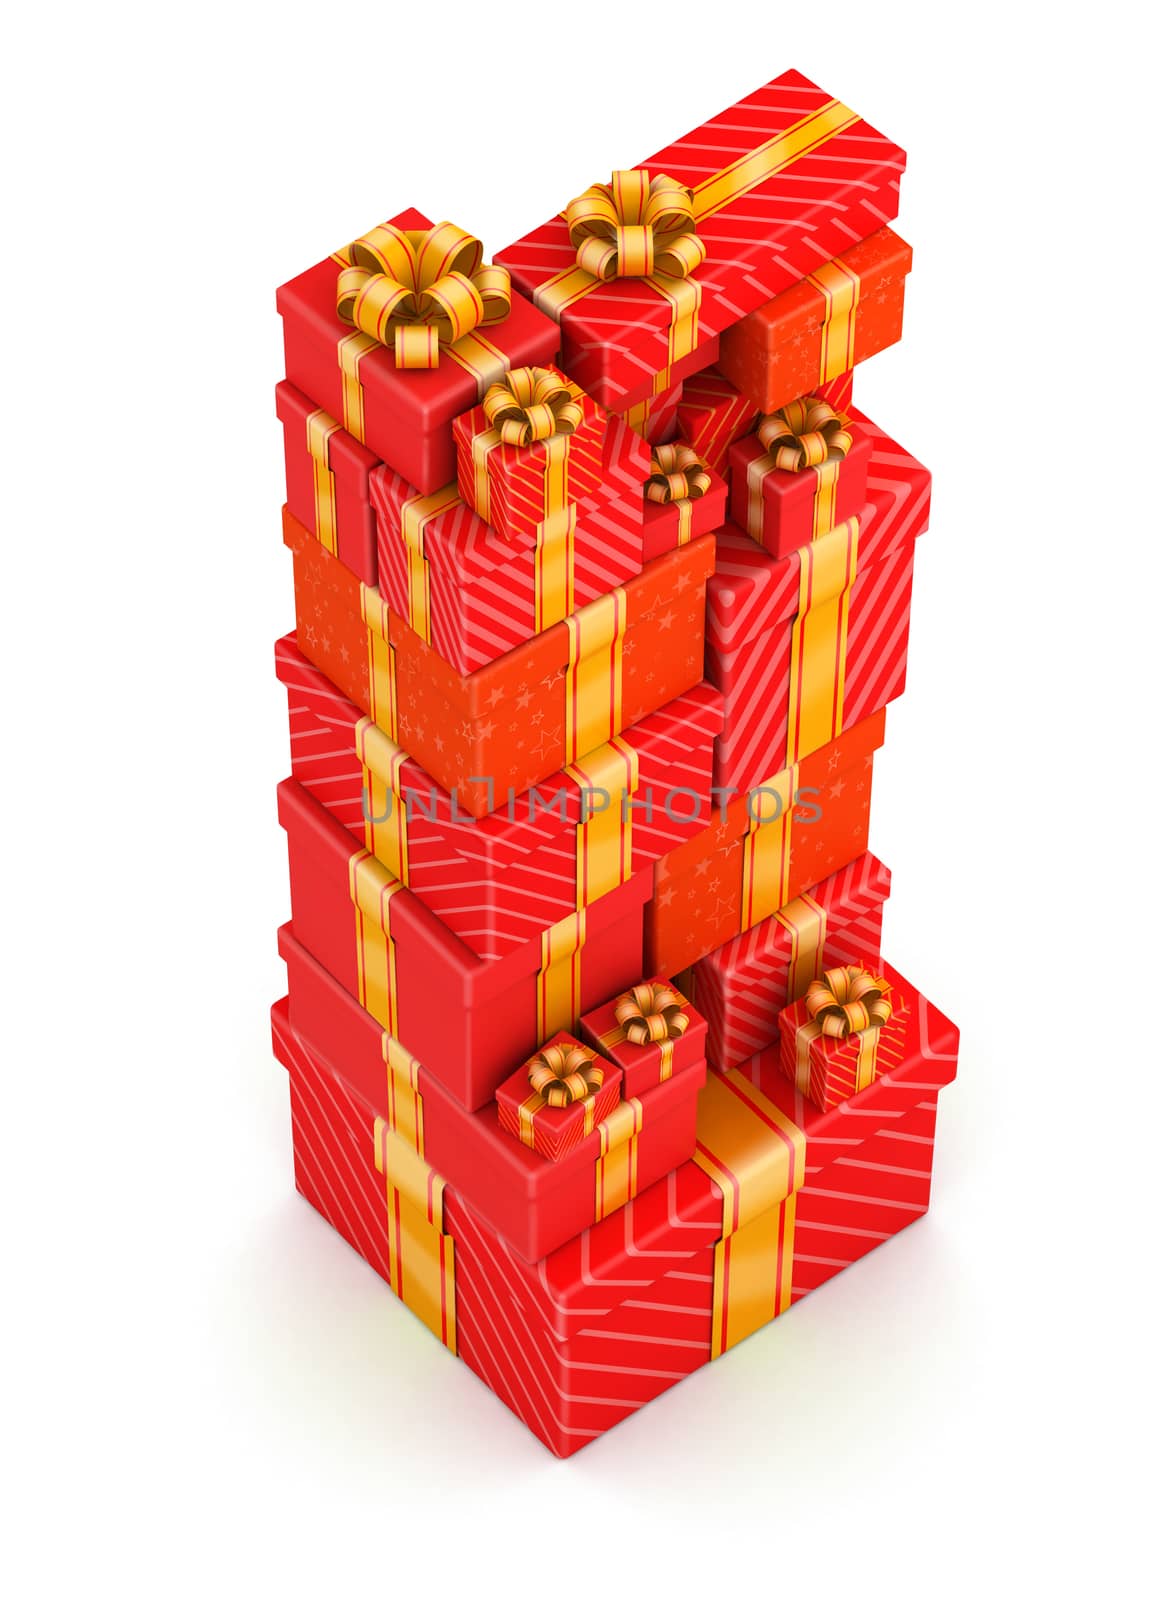 Tall stack of red gift boxes on white background